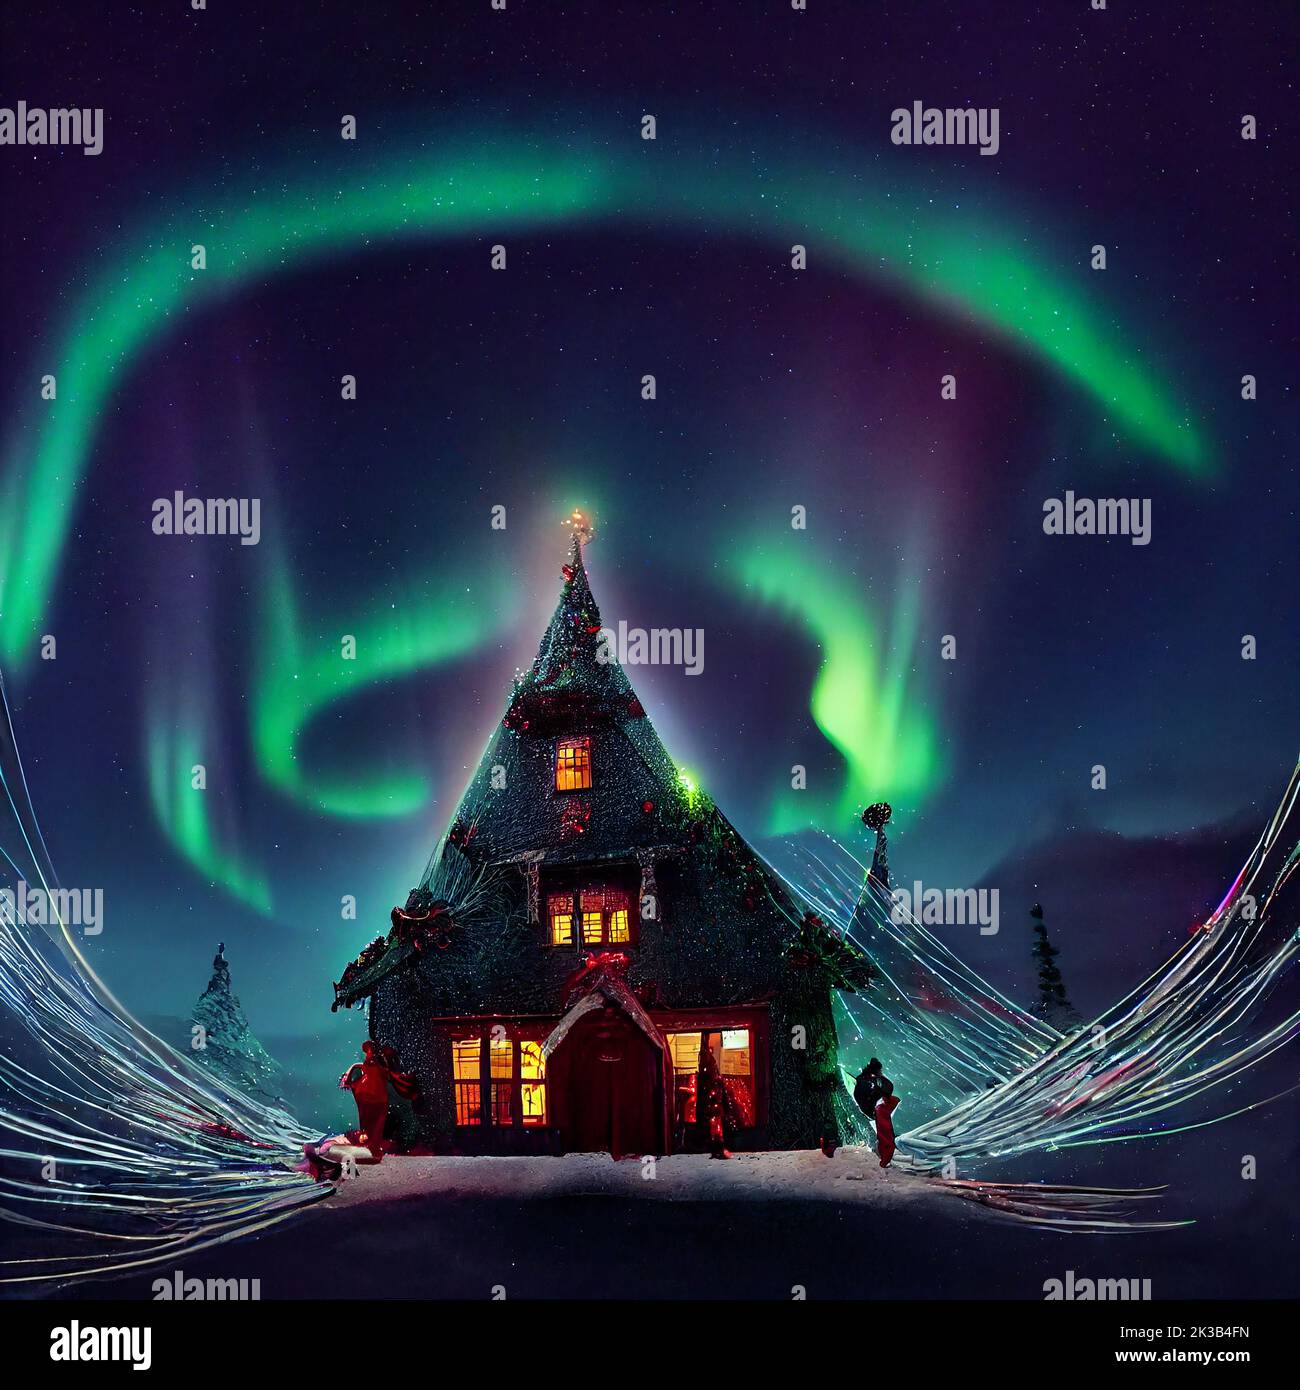 Match bue specifikation Santa's house at the North Pole in the Arctic circle Northern Lights in the  sky. Pine ttrees,decorated Christmas ornaments, surrounded by snowfall  Stock Photo - Alamy